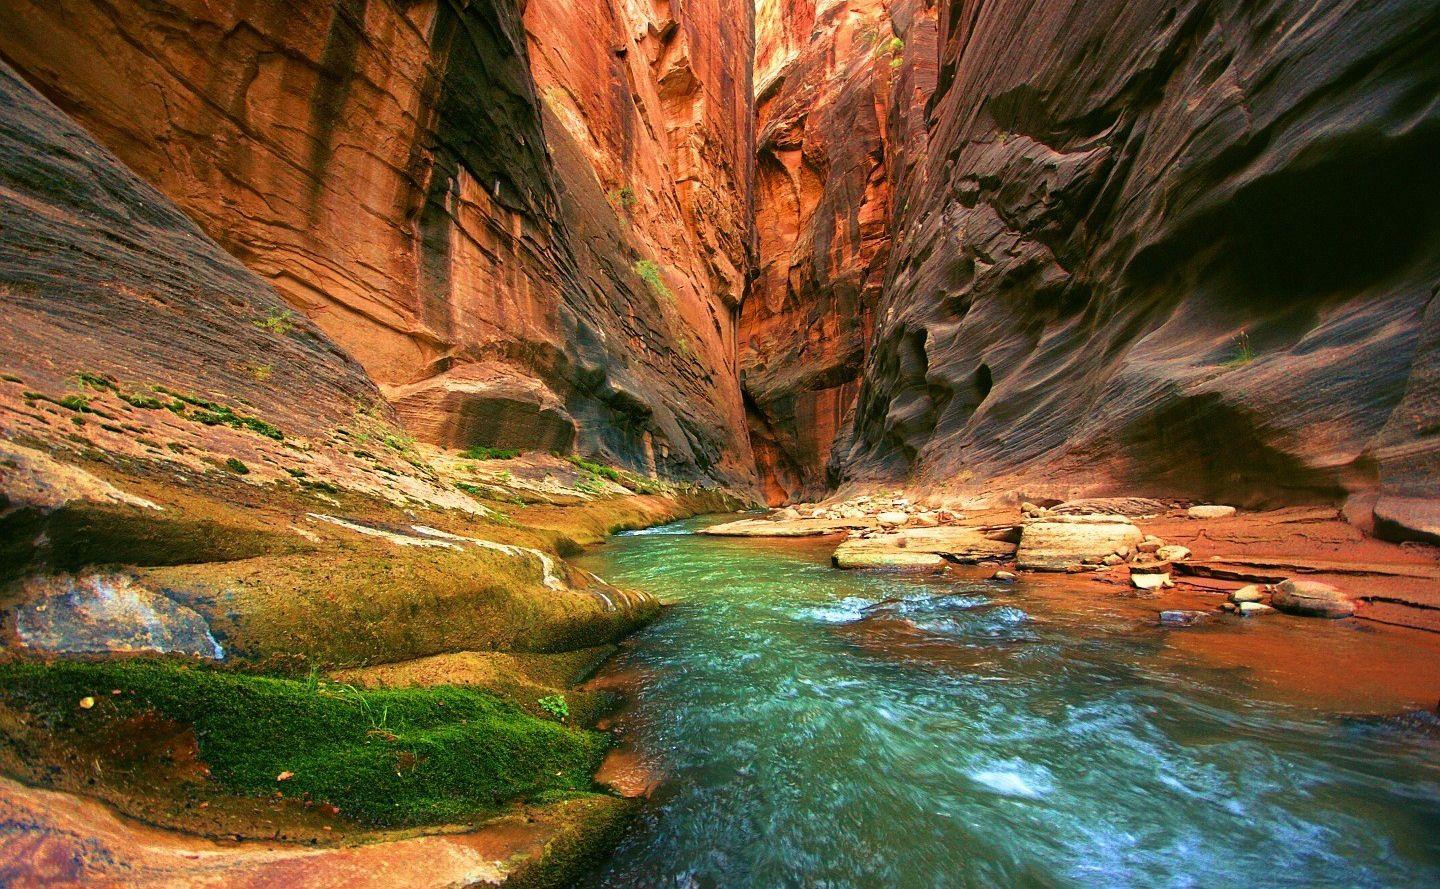 Hiking the Narrows in Zion. Hiking Zion. National